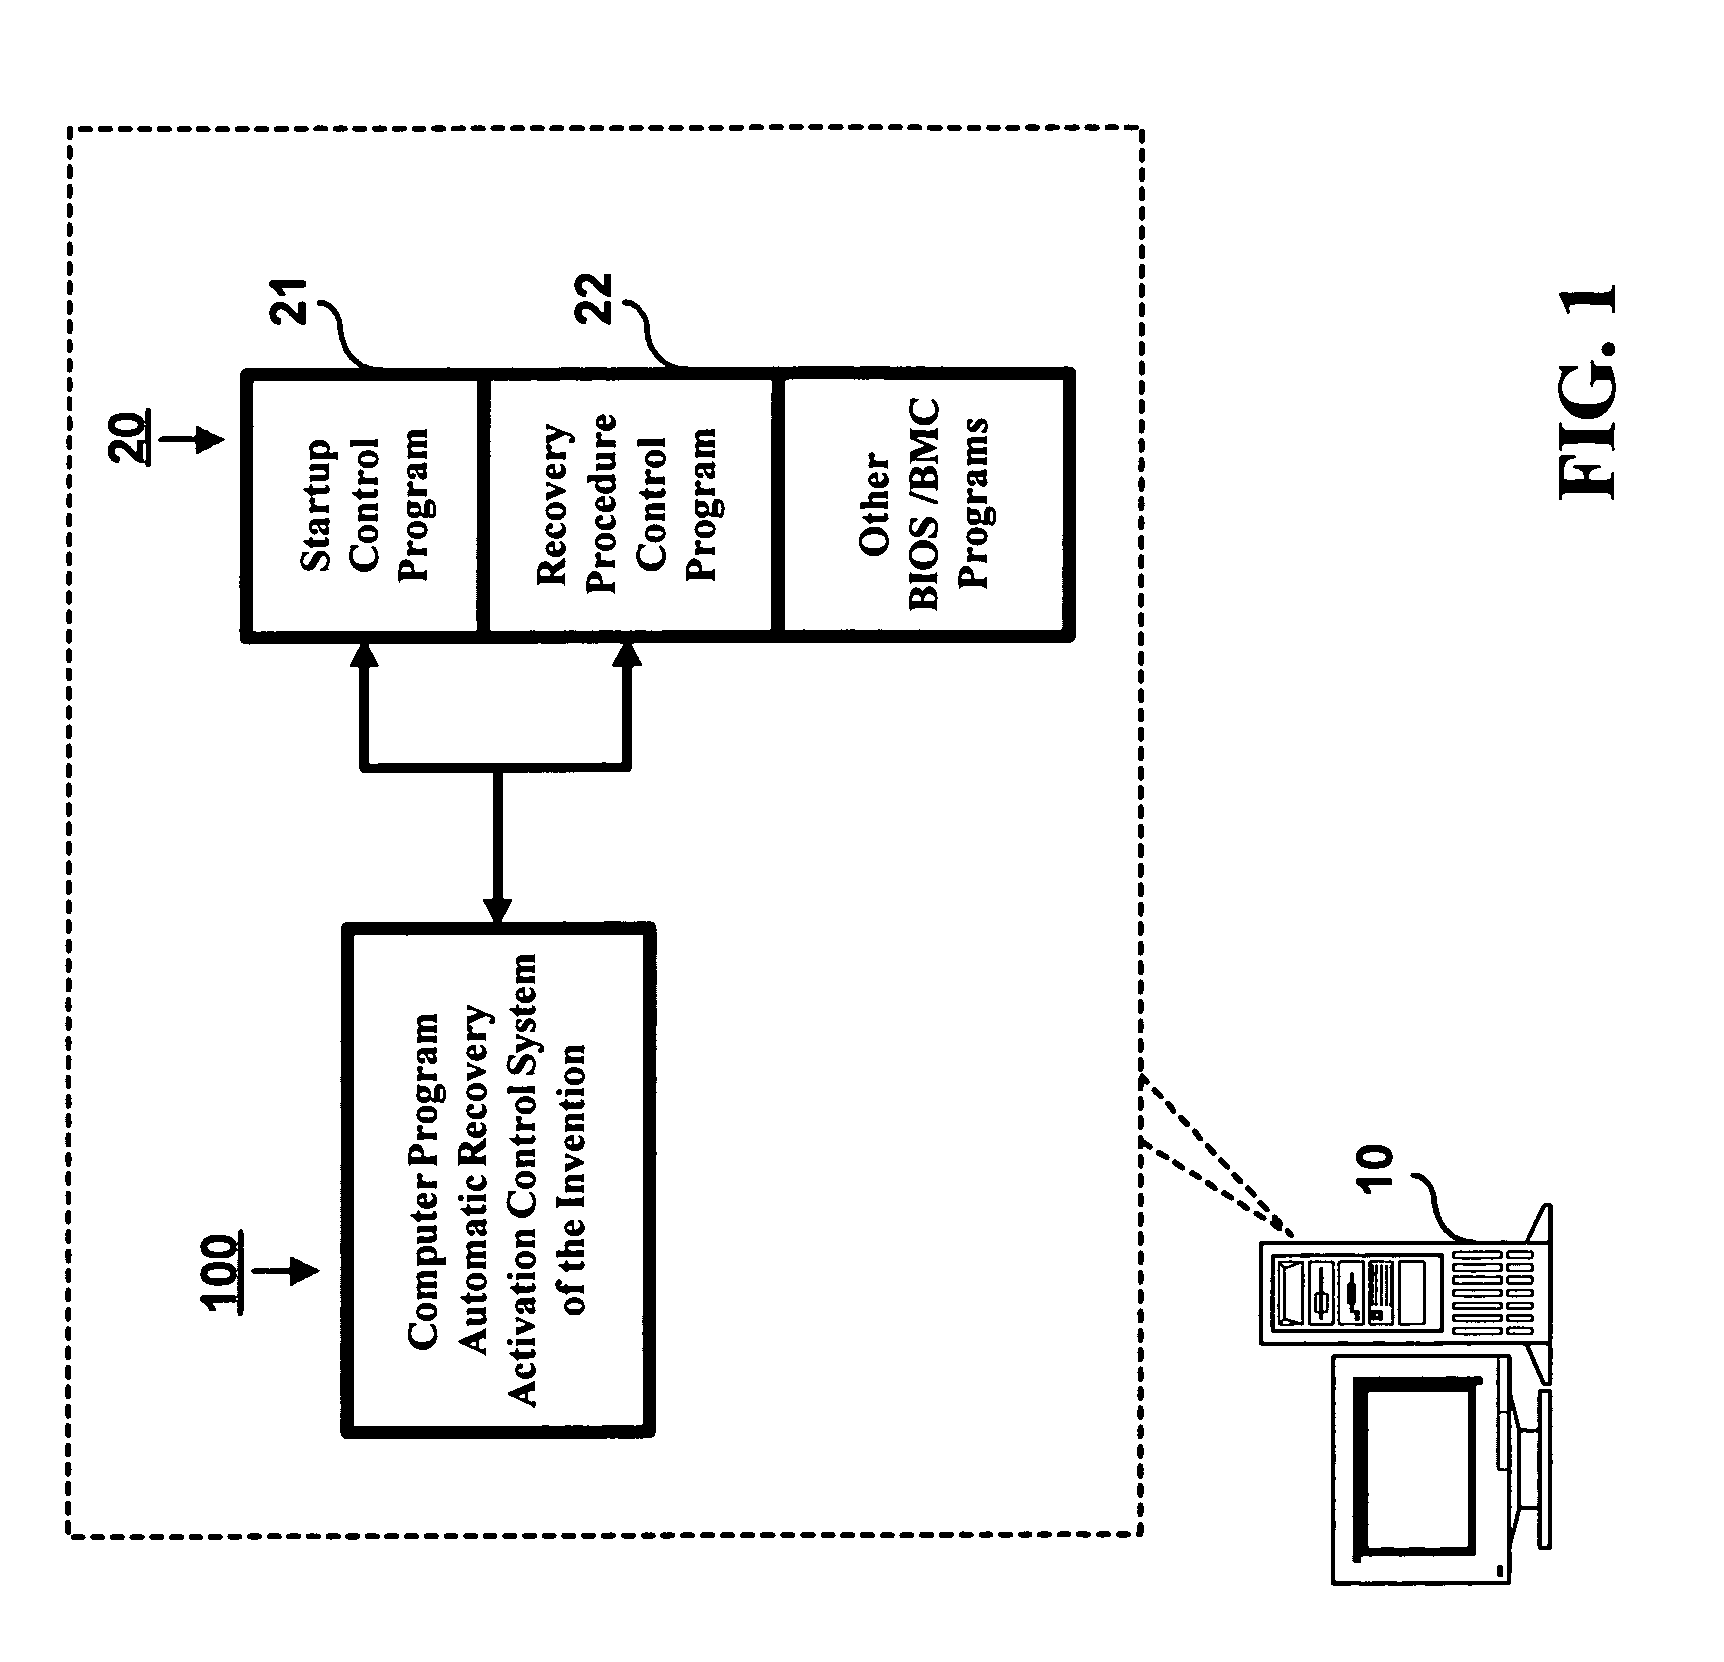 Computer program automatic recovery activation control method and system